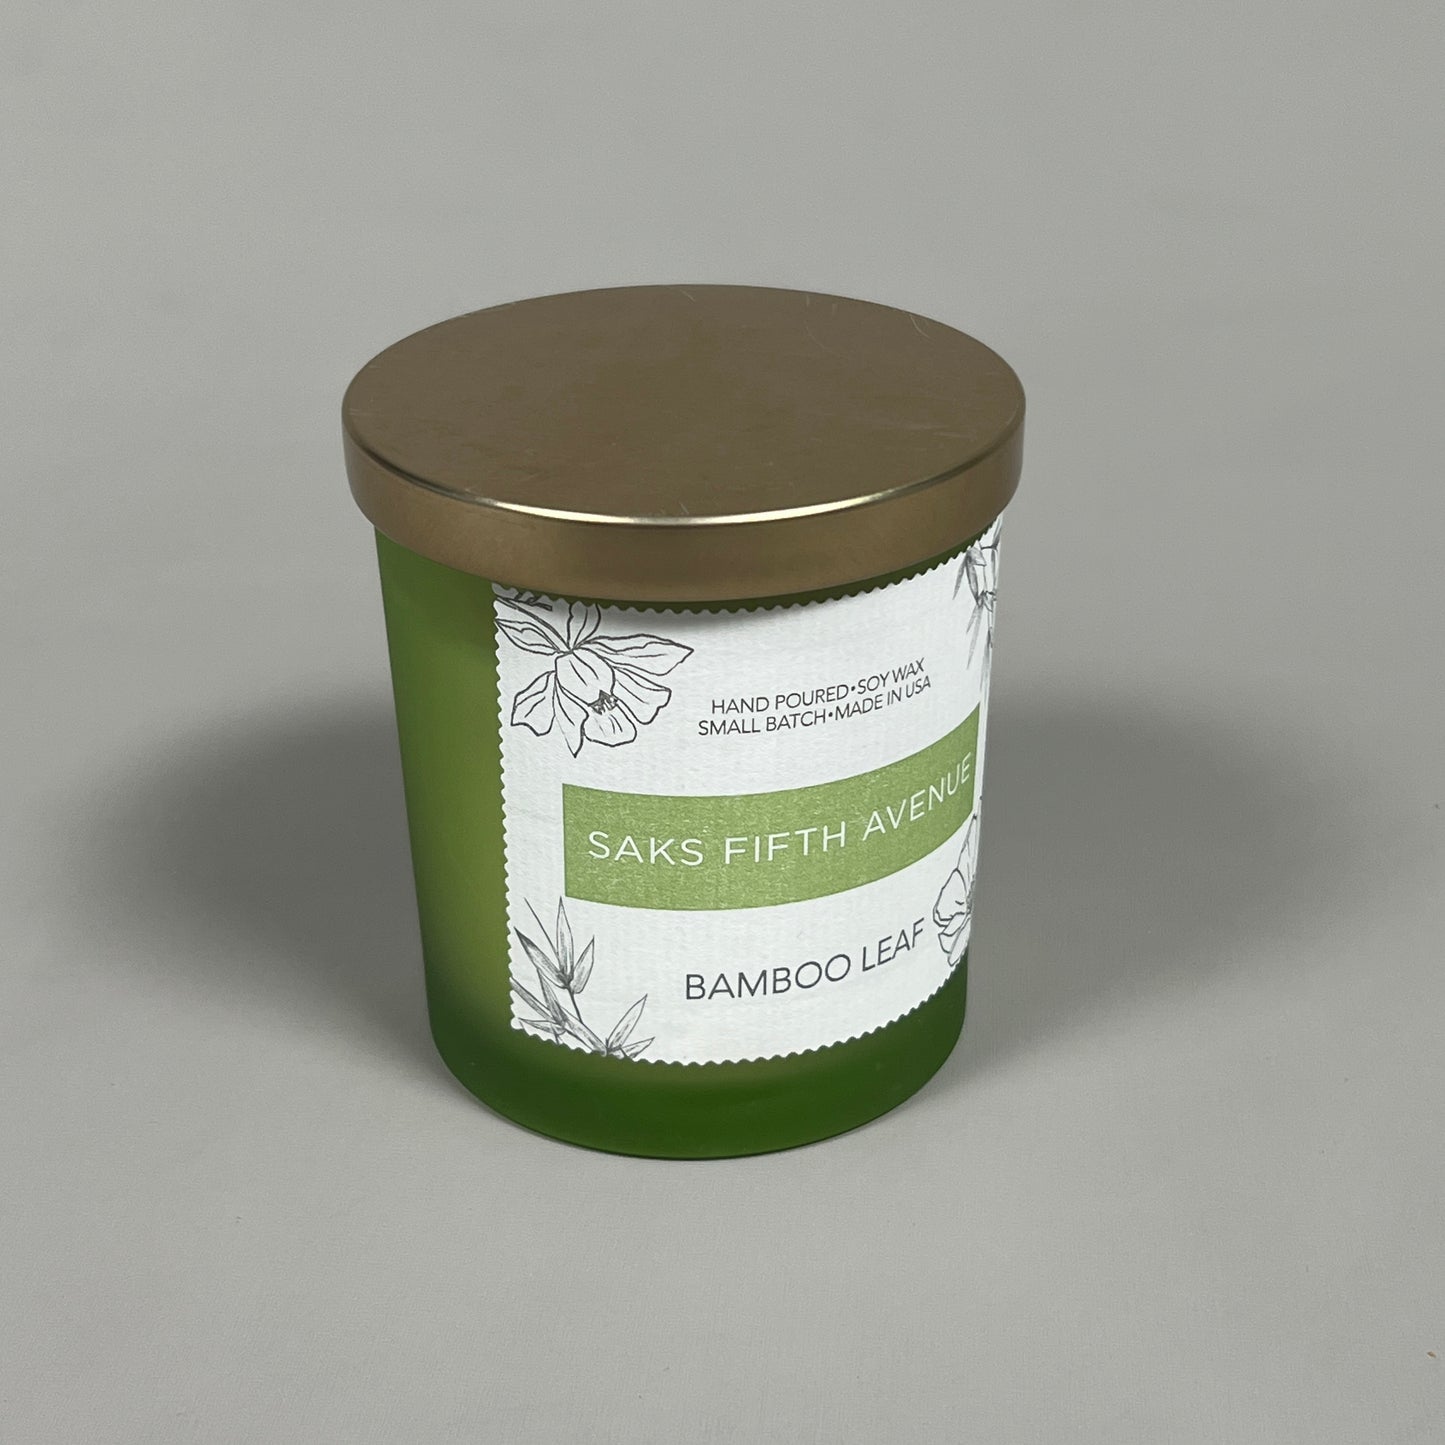 SAKS FIFTH AVENUE Bamboo Leaf Hand Poured Soy Wax Candle 8 fl oz (New)